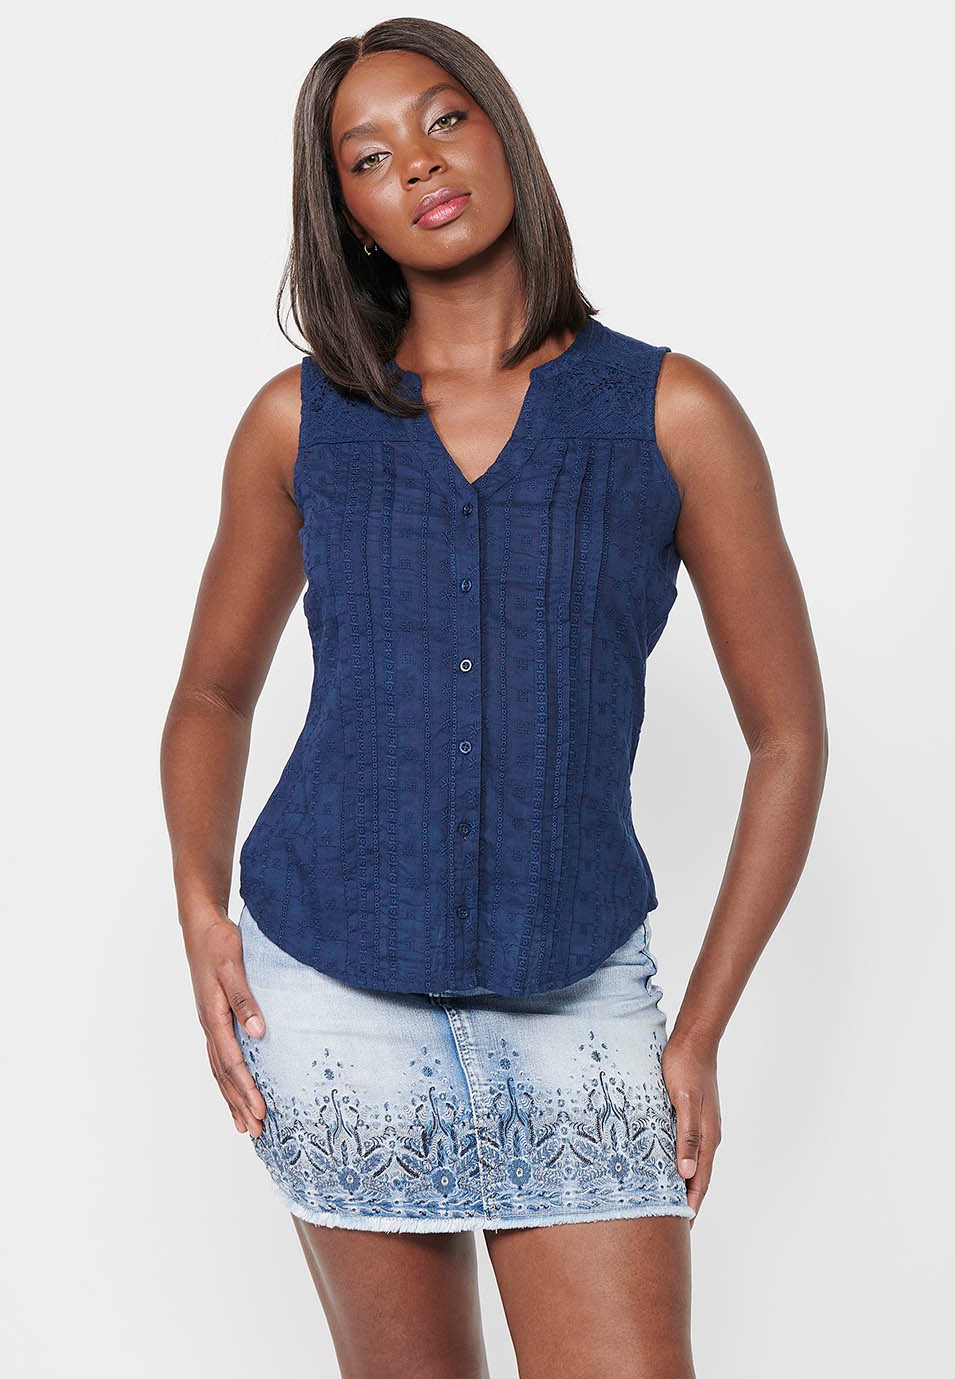 Embroidered Fabric Sleeveless Blouse with V-Neckline and Front Closure with Navy Color Buttons for Women